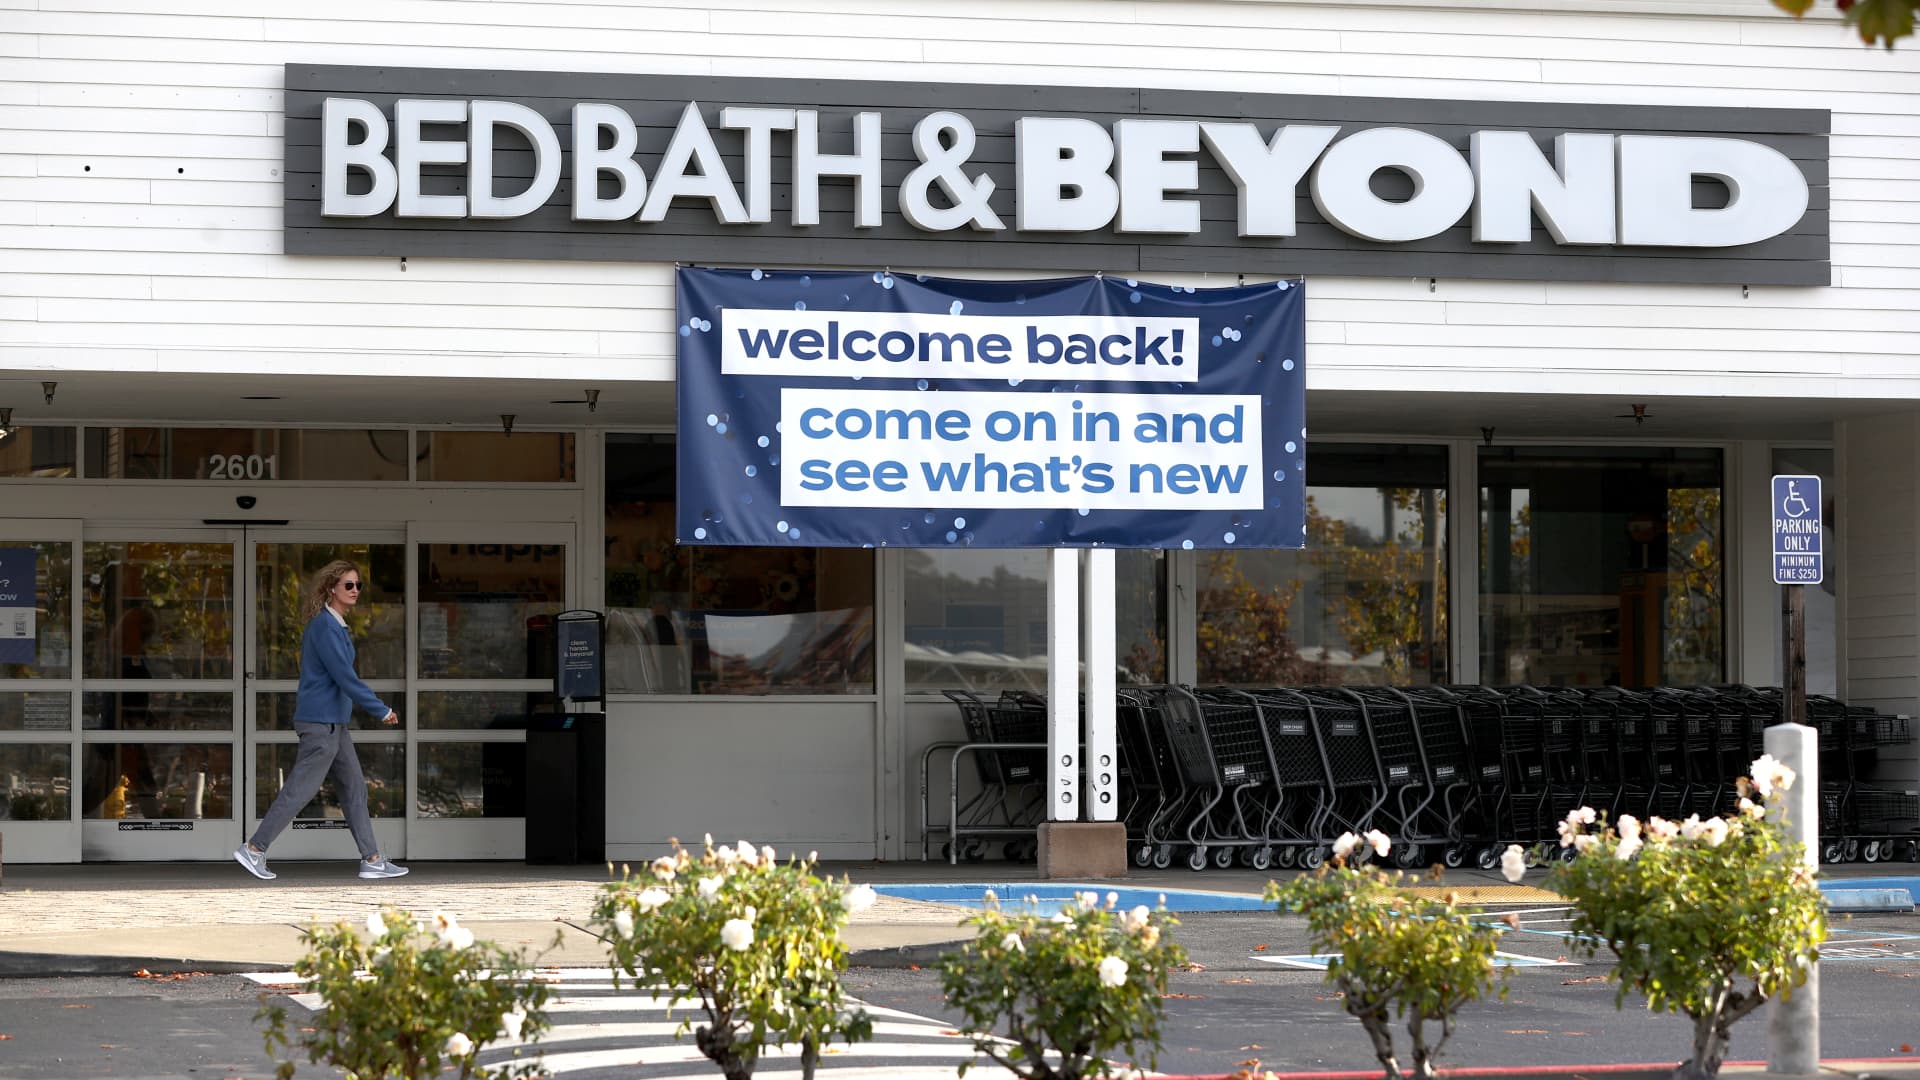 Bed Bath & Beyond posts disappointing results after low inventory hurt business in the holiday quarter – CNBC